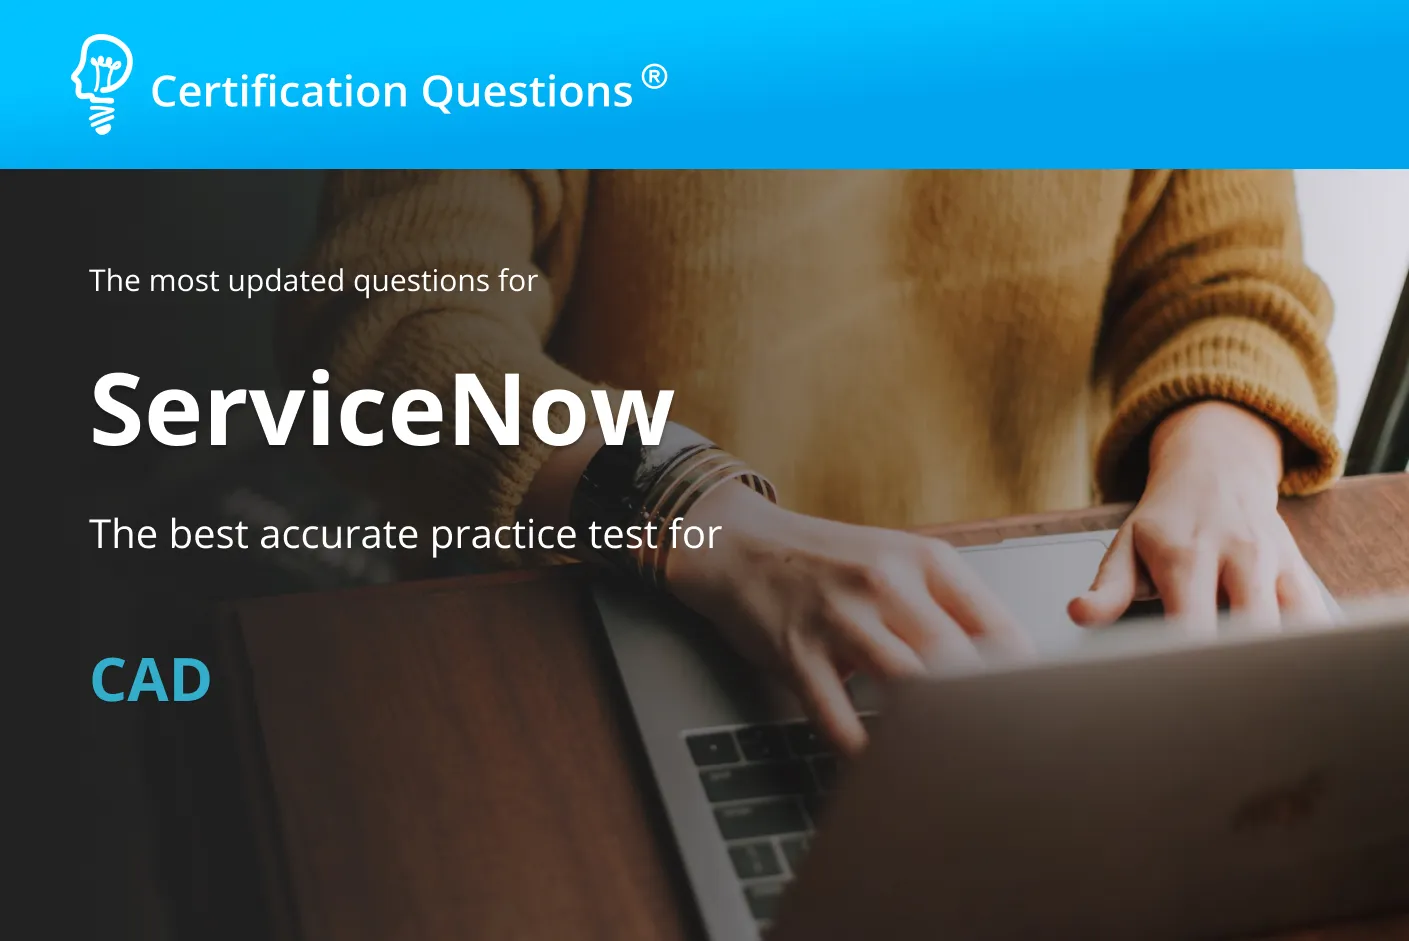 This image is related to servicenow cad exam questions